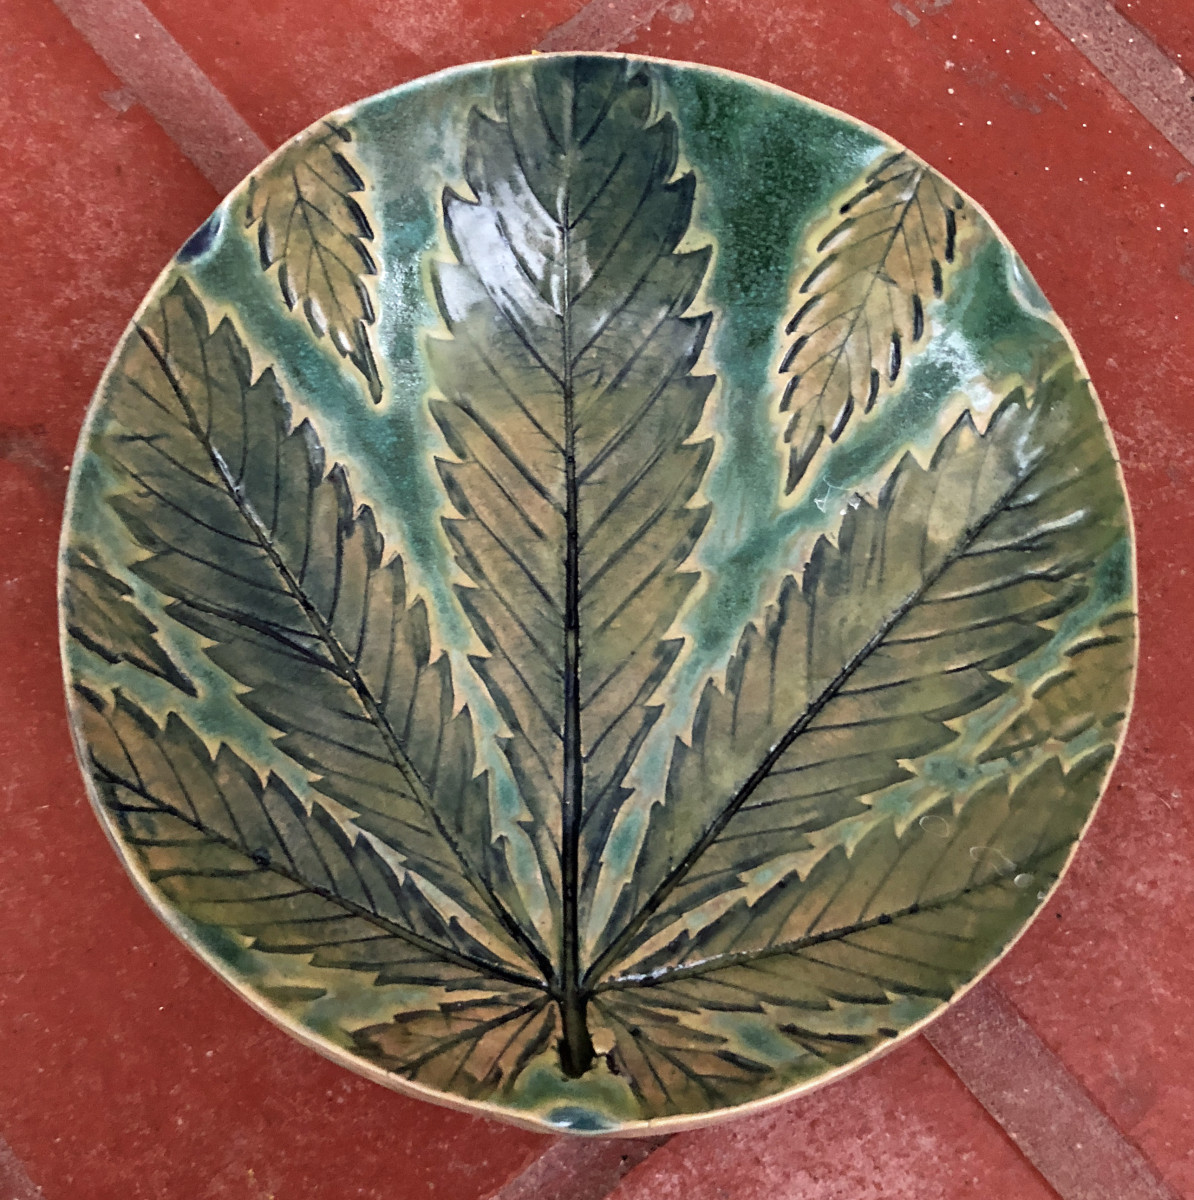 Rain Forest, a 420 impression small bowl by Nell Eakin 